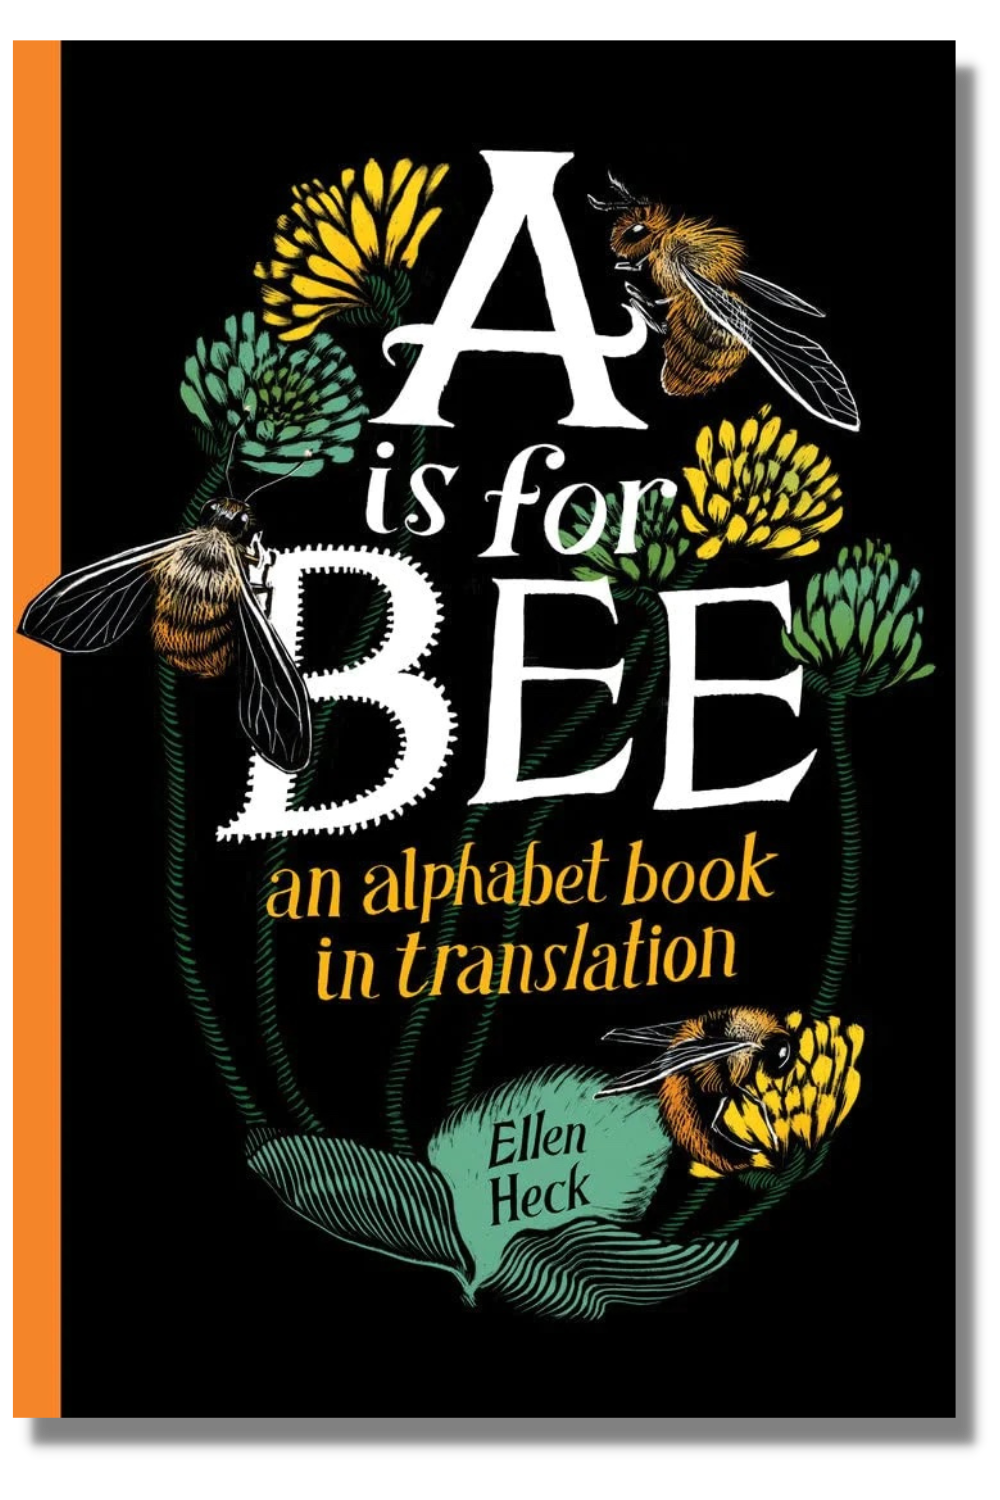 The cover of "A Is for Bee"